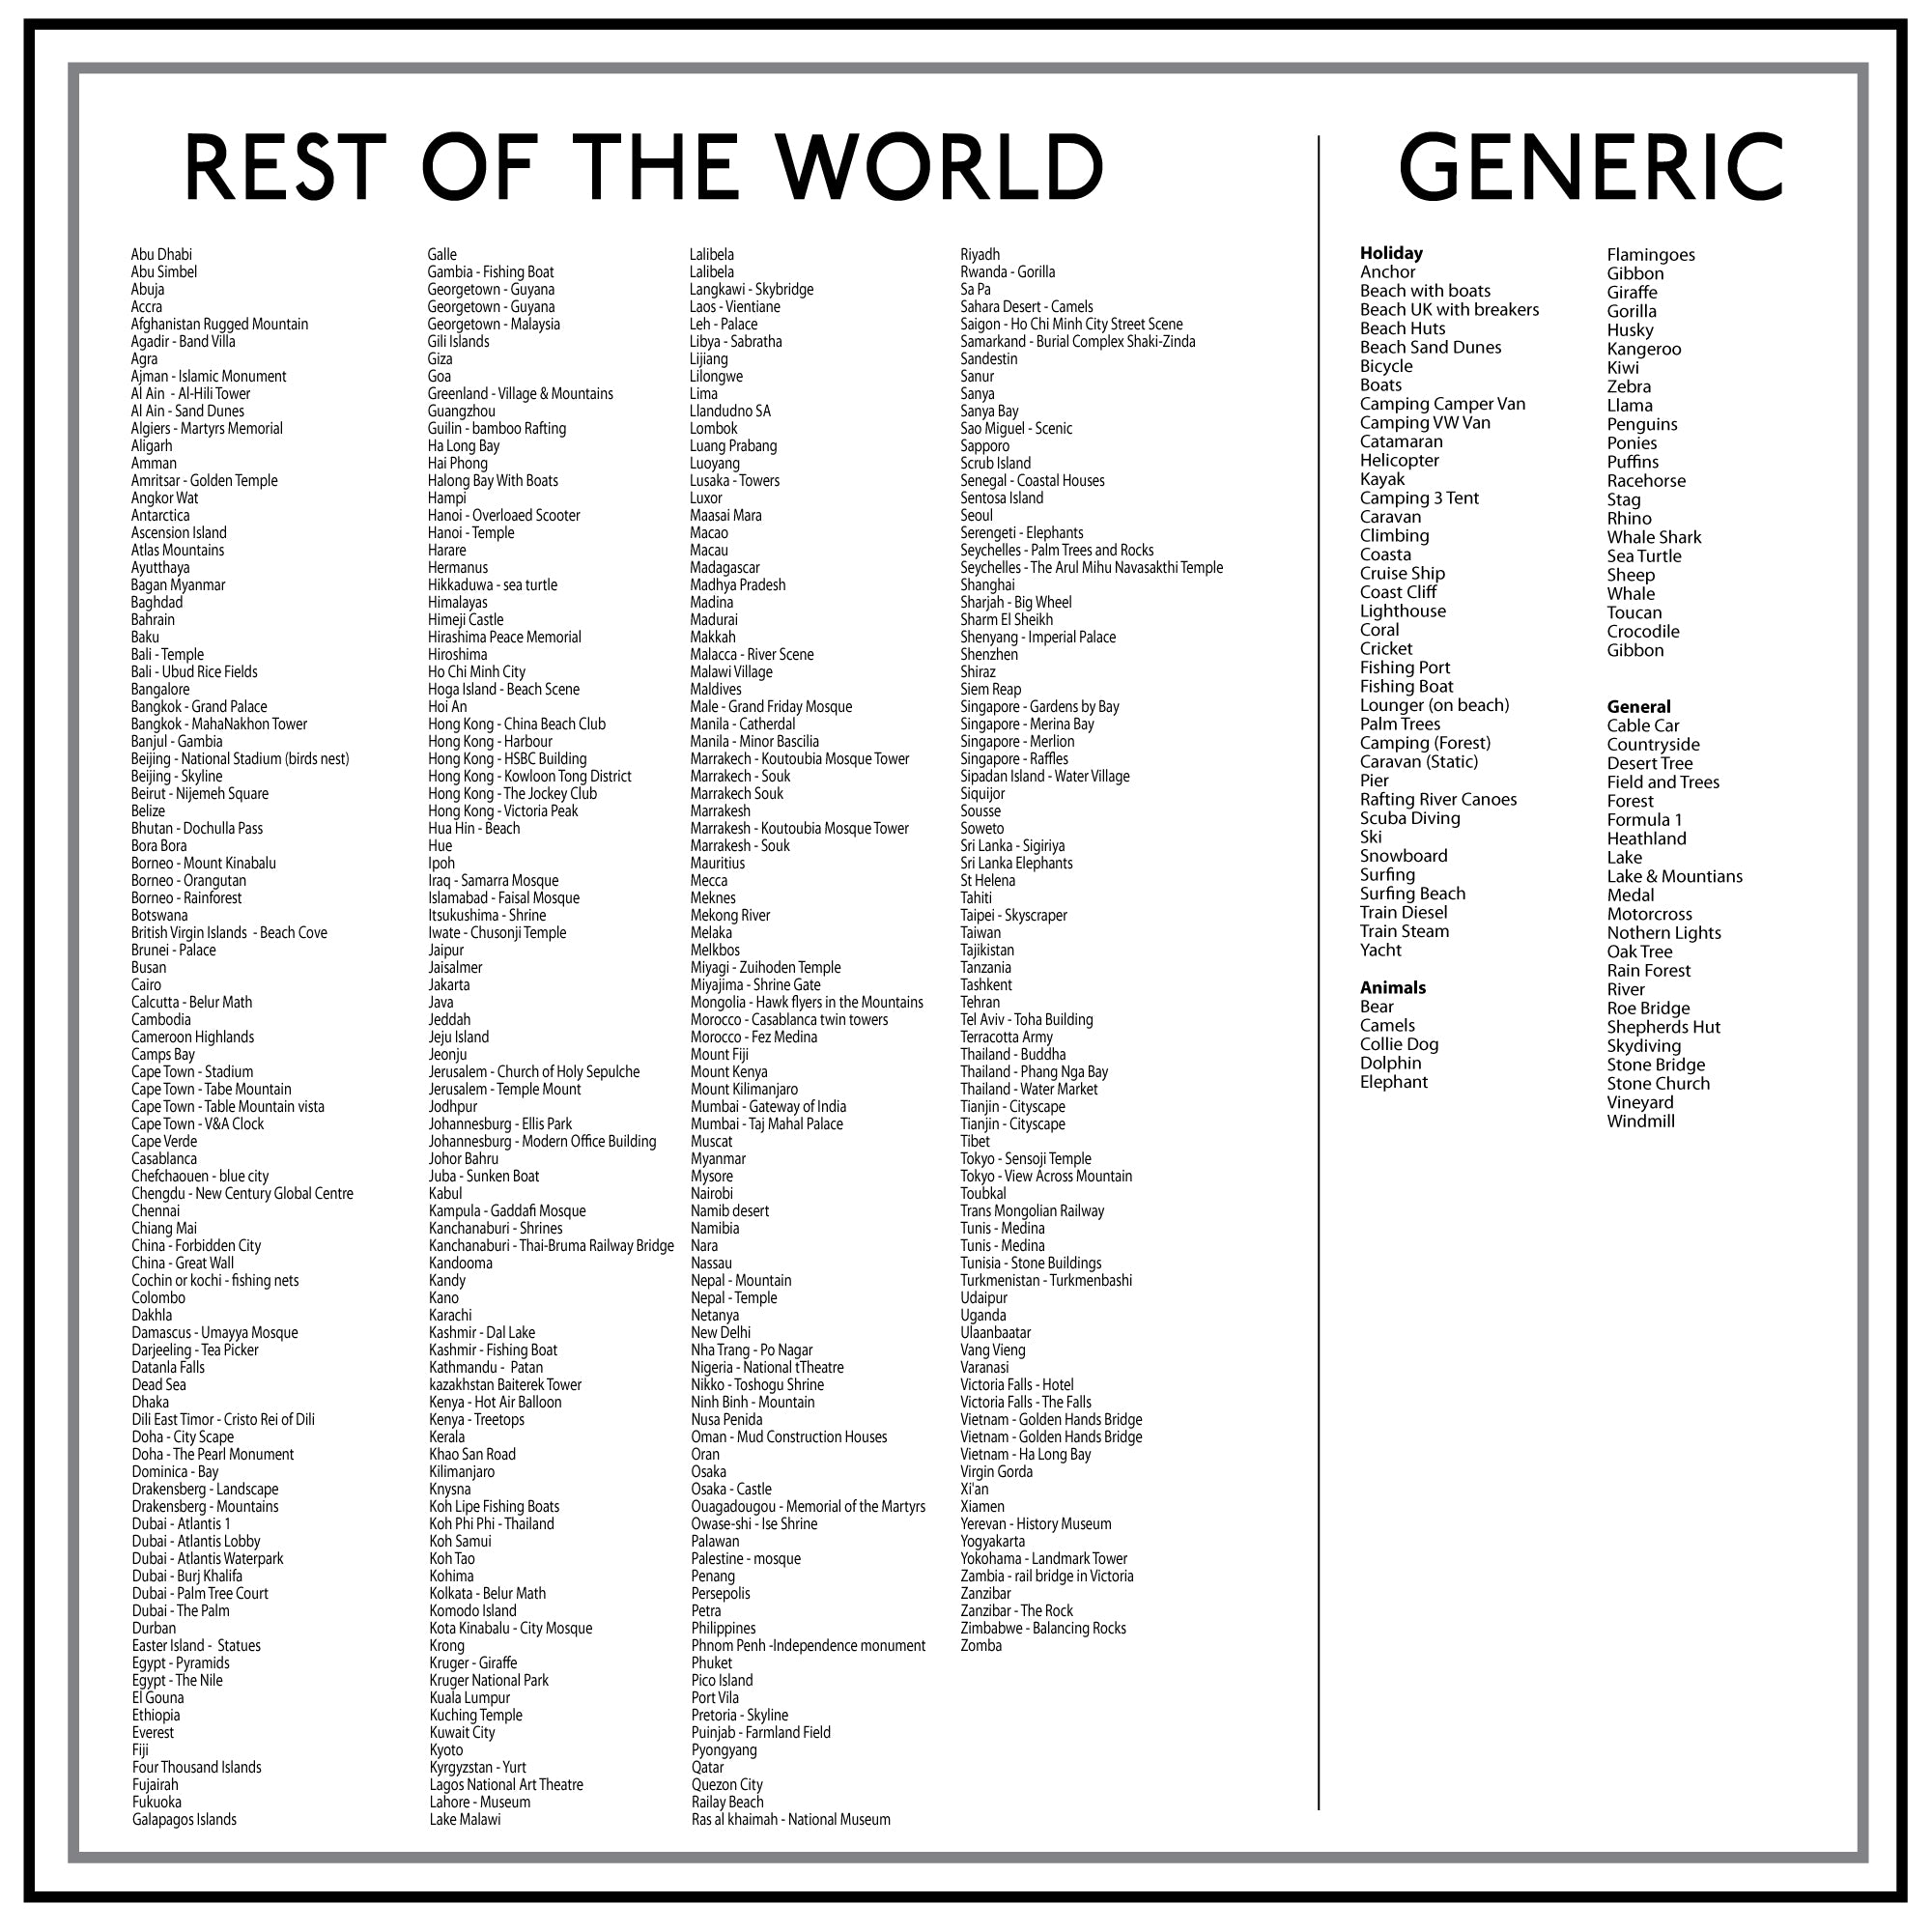 Image showing list of Rest of the World and Gneric Destinations